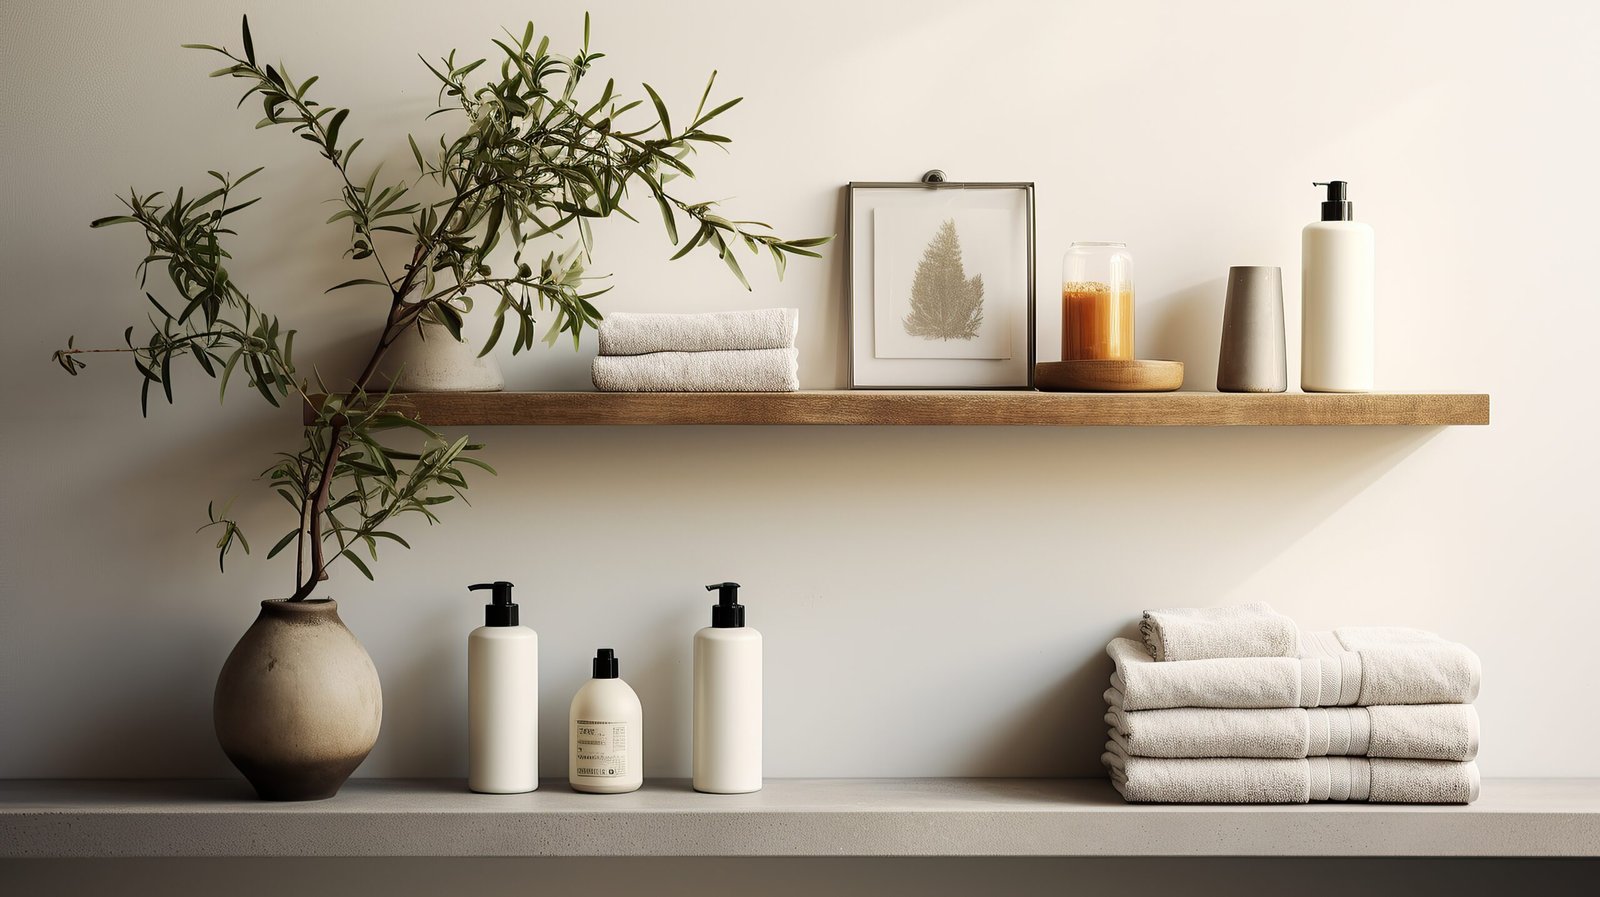 A detailed shot of a minimalist bathroom shelf, adorned with carefully curated essentials and decorative elements.